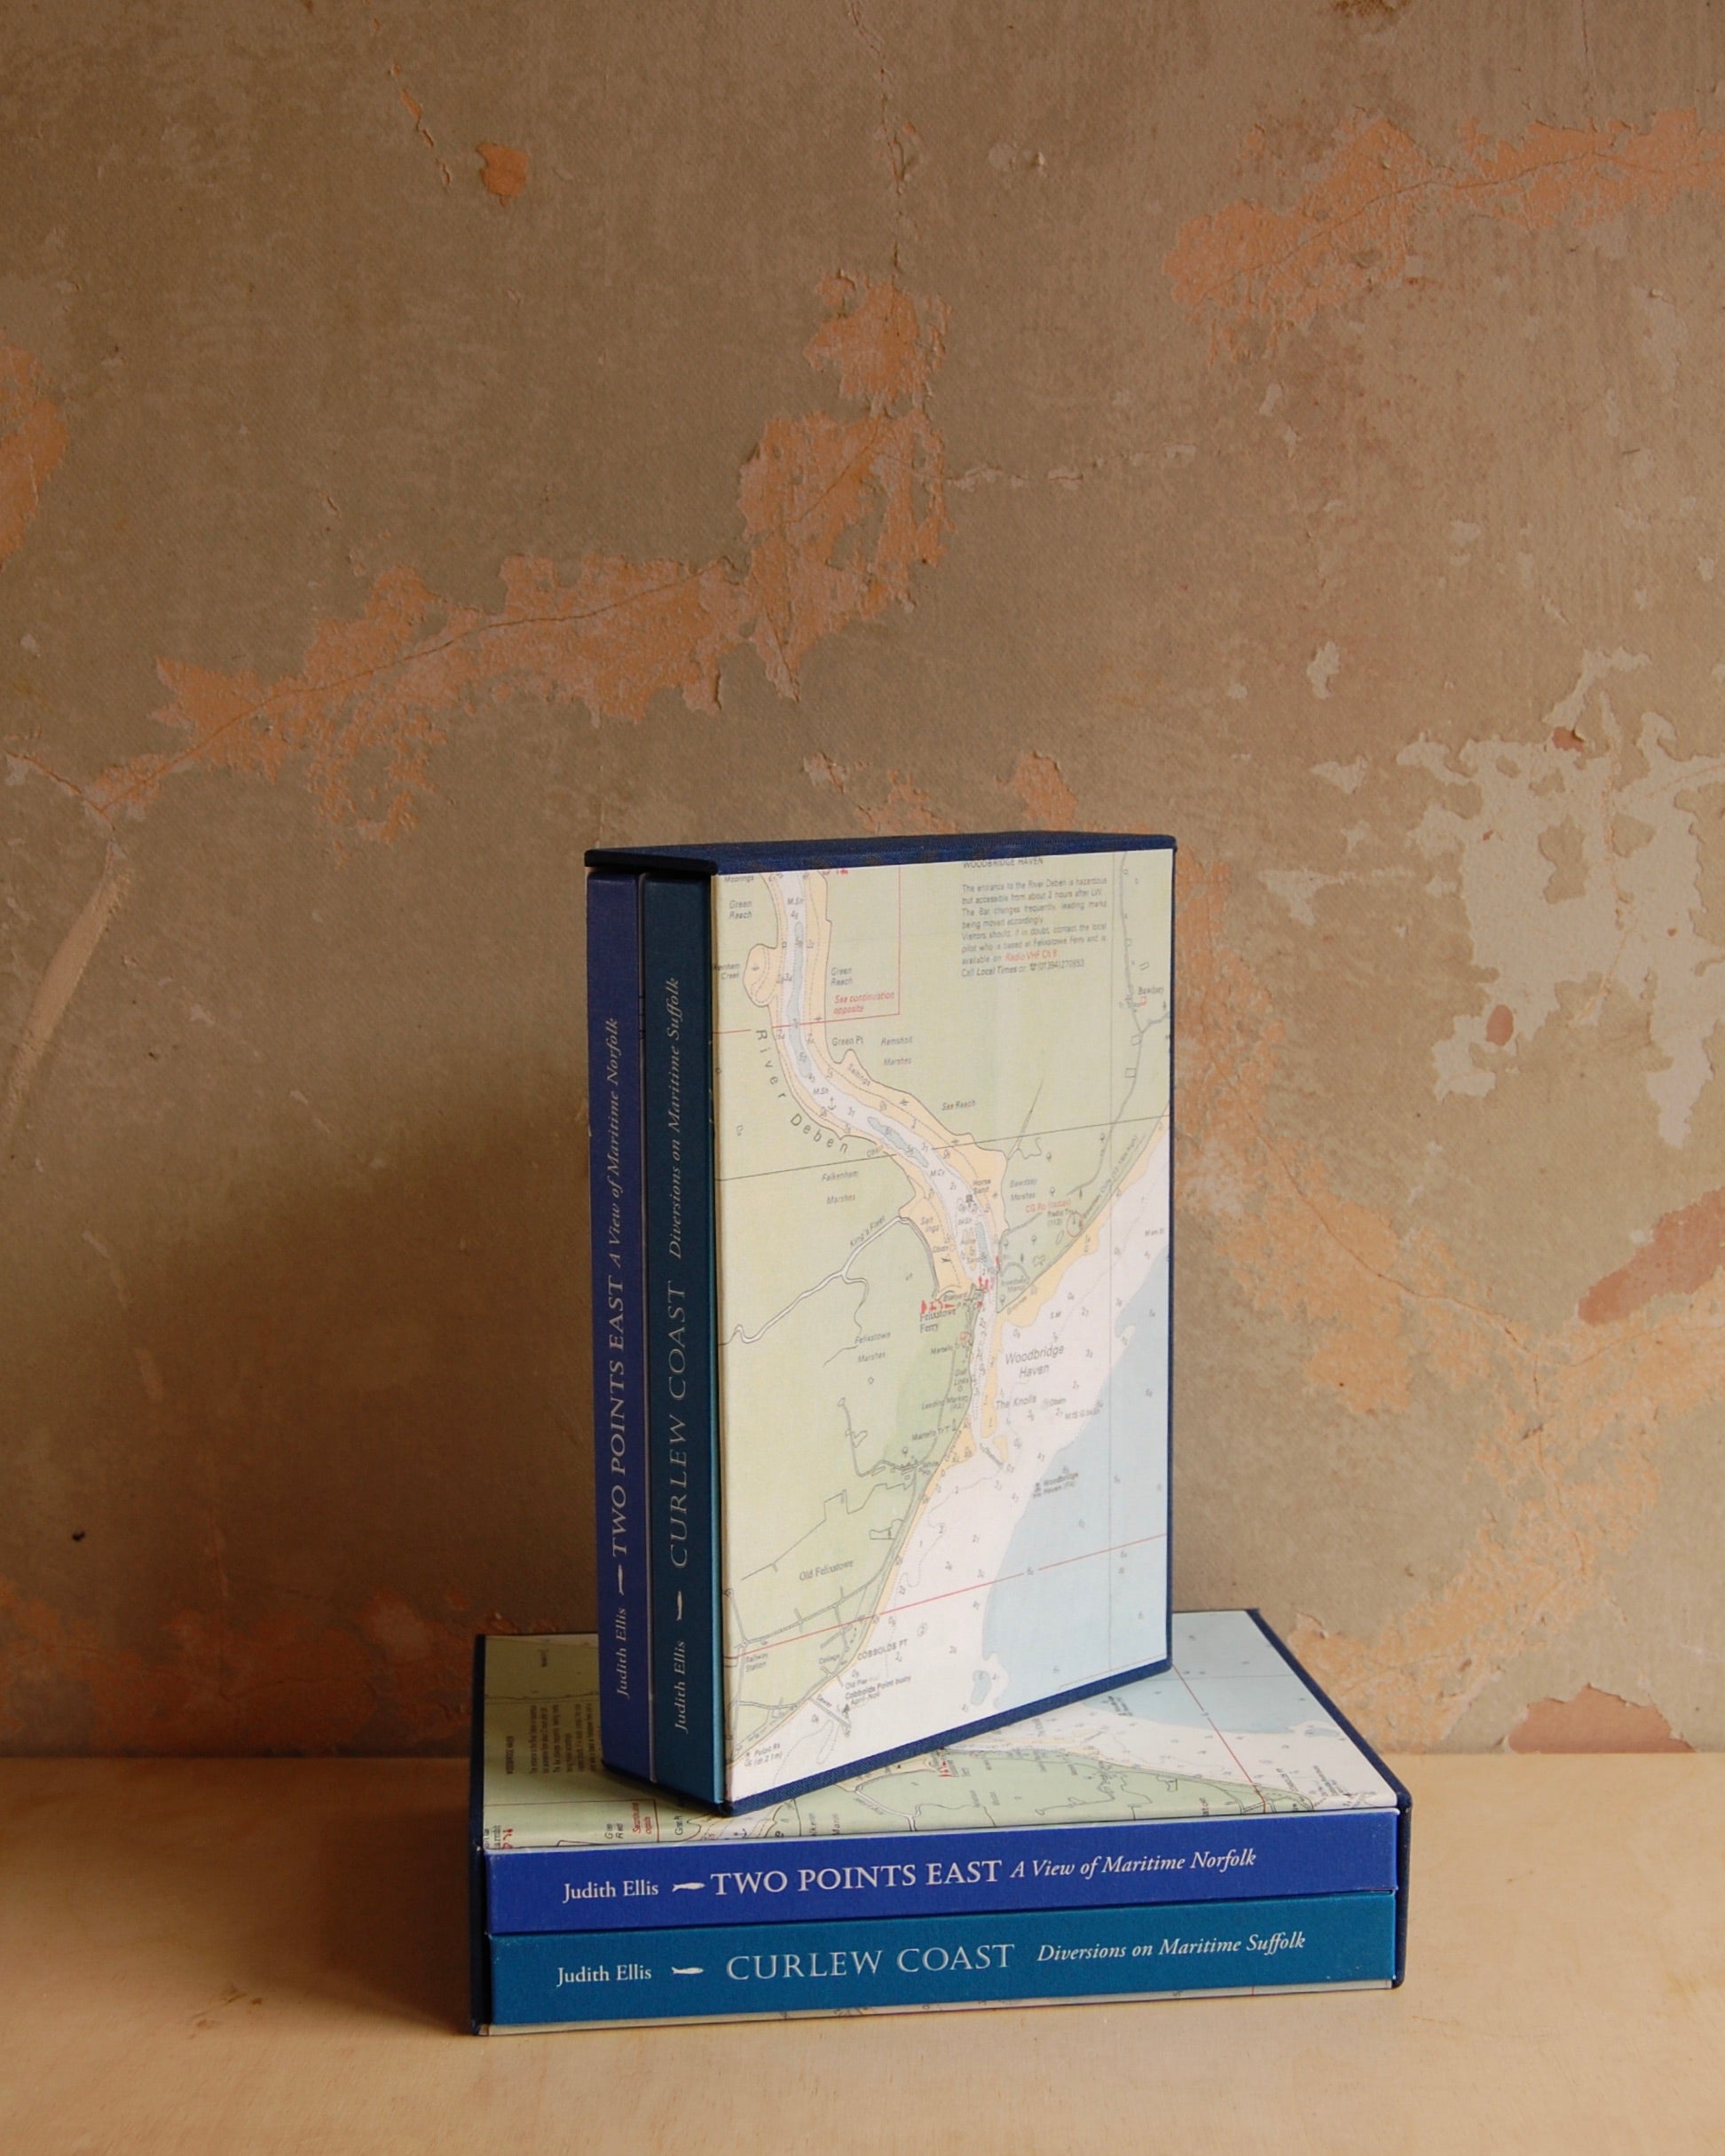 the book studio judith ellis hand-made hand-bound Slipcase set of Curlew Coast and Two Points East by Judith Ellis